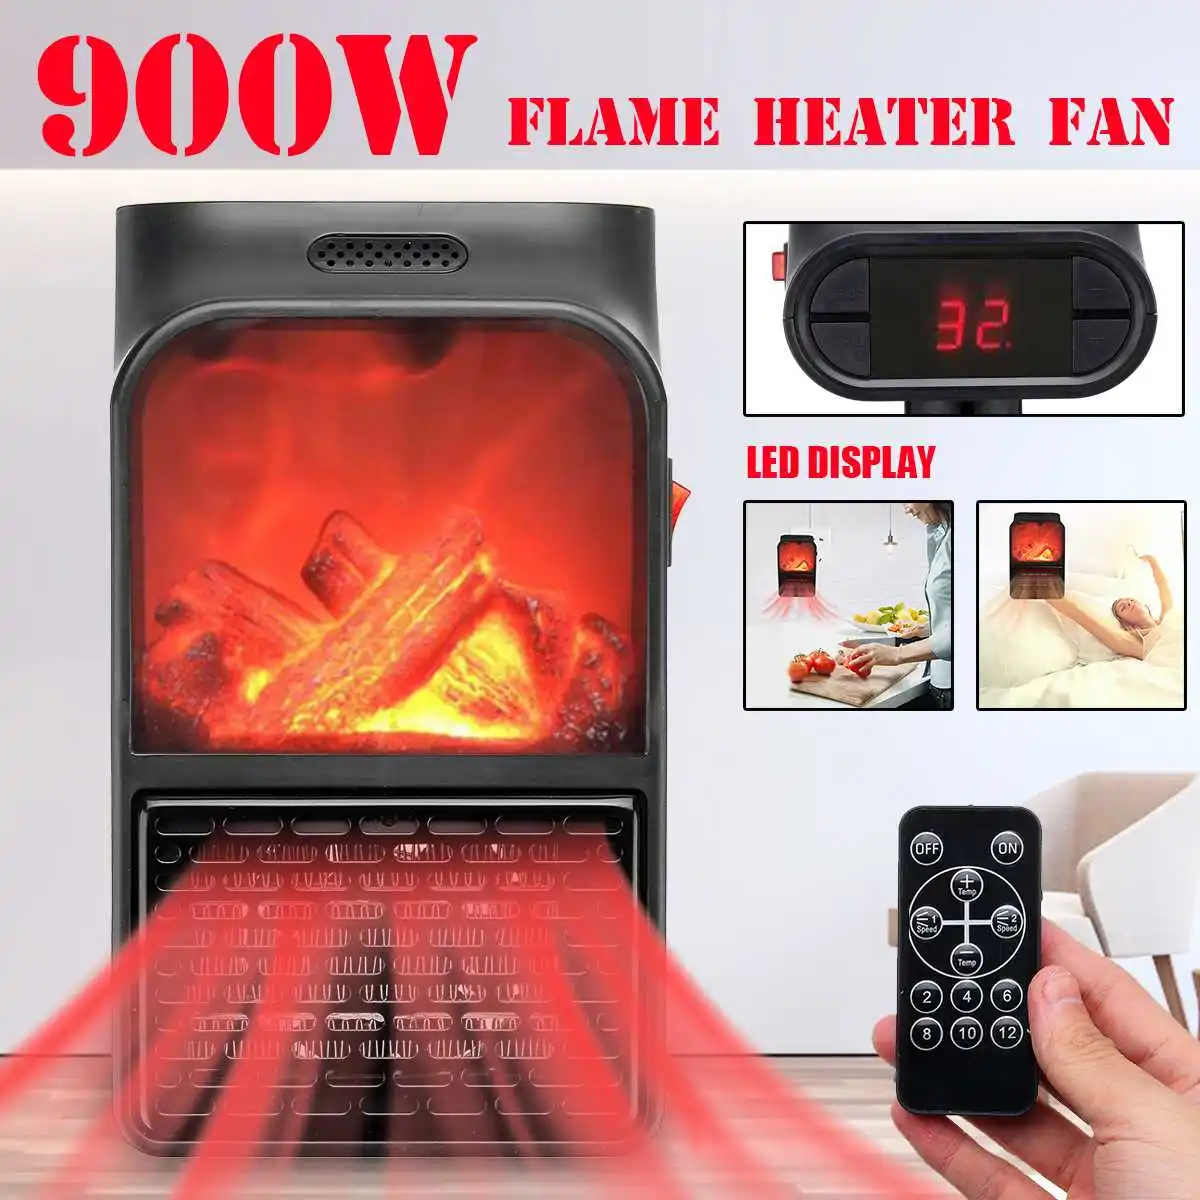 900W Thermostat Electric Space Fan Heater Remote Control Heater FREE SHIPPING